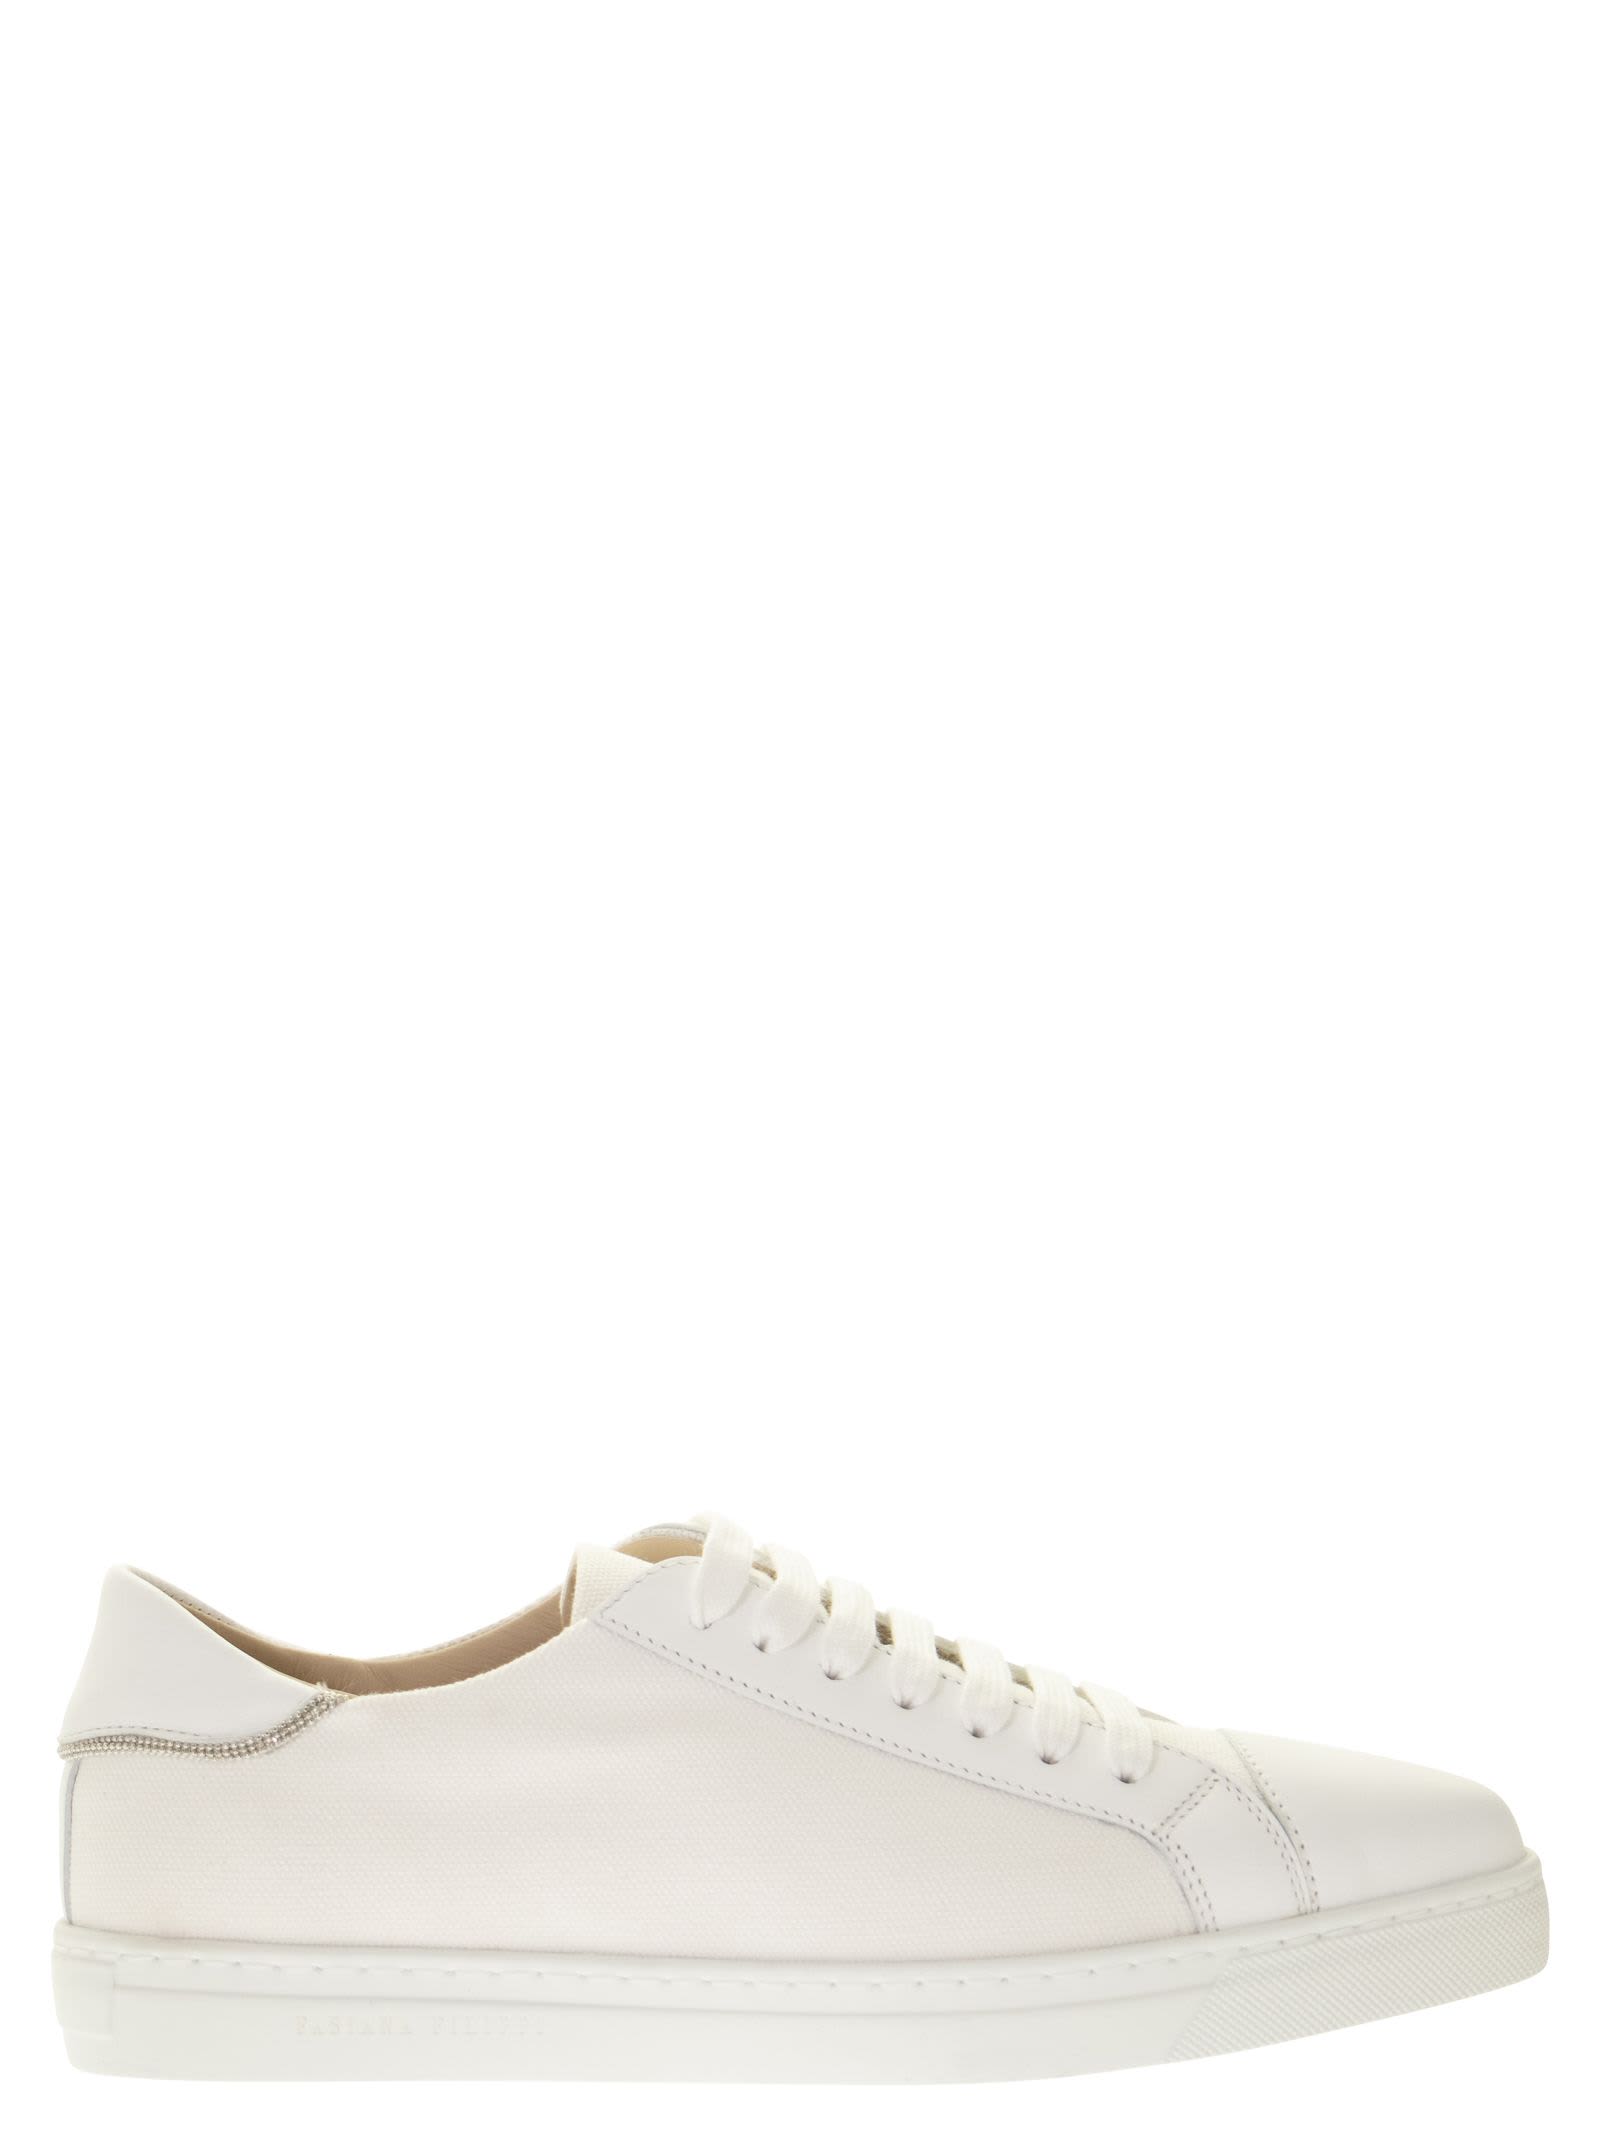 Fabiana Filippi Leather And Canvas Sneakers